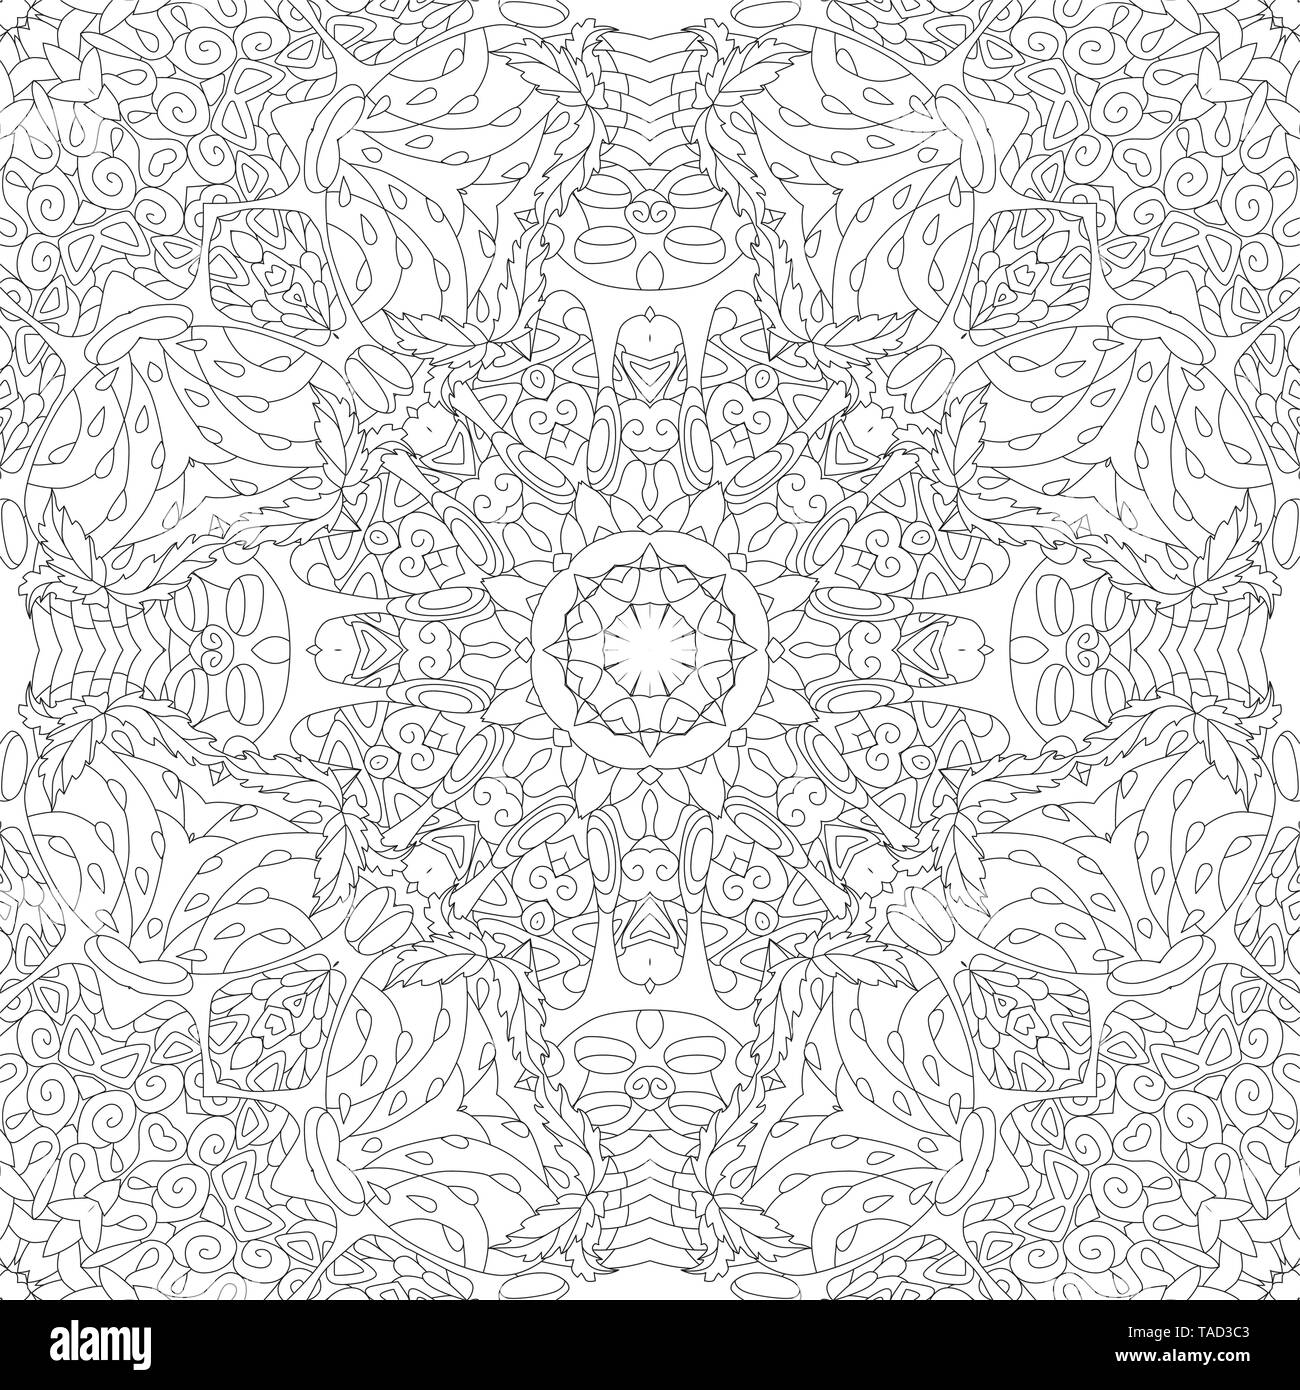 Decorative square seamless ornaments. Unusual flower shape. Oriental vector, Anti-stress therapy patterns. Weave design elements. Stock Vector